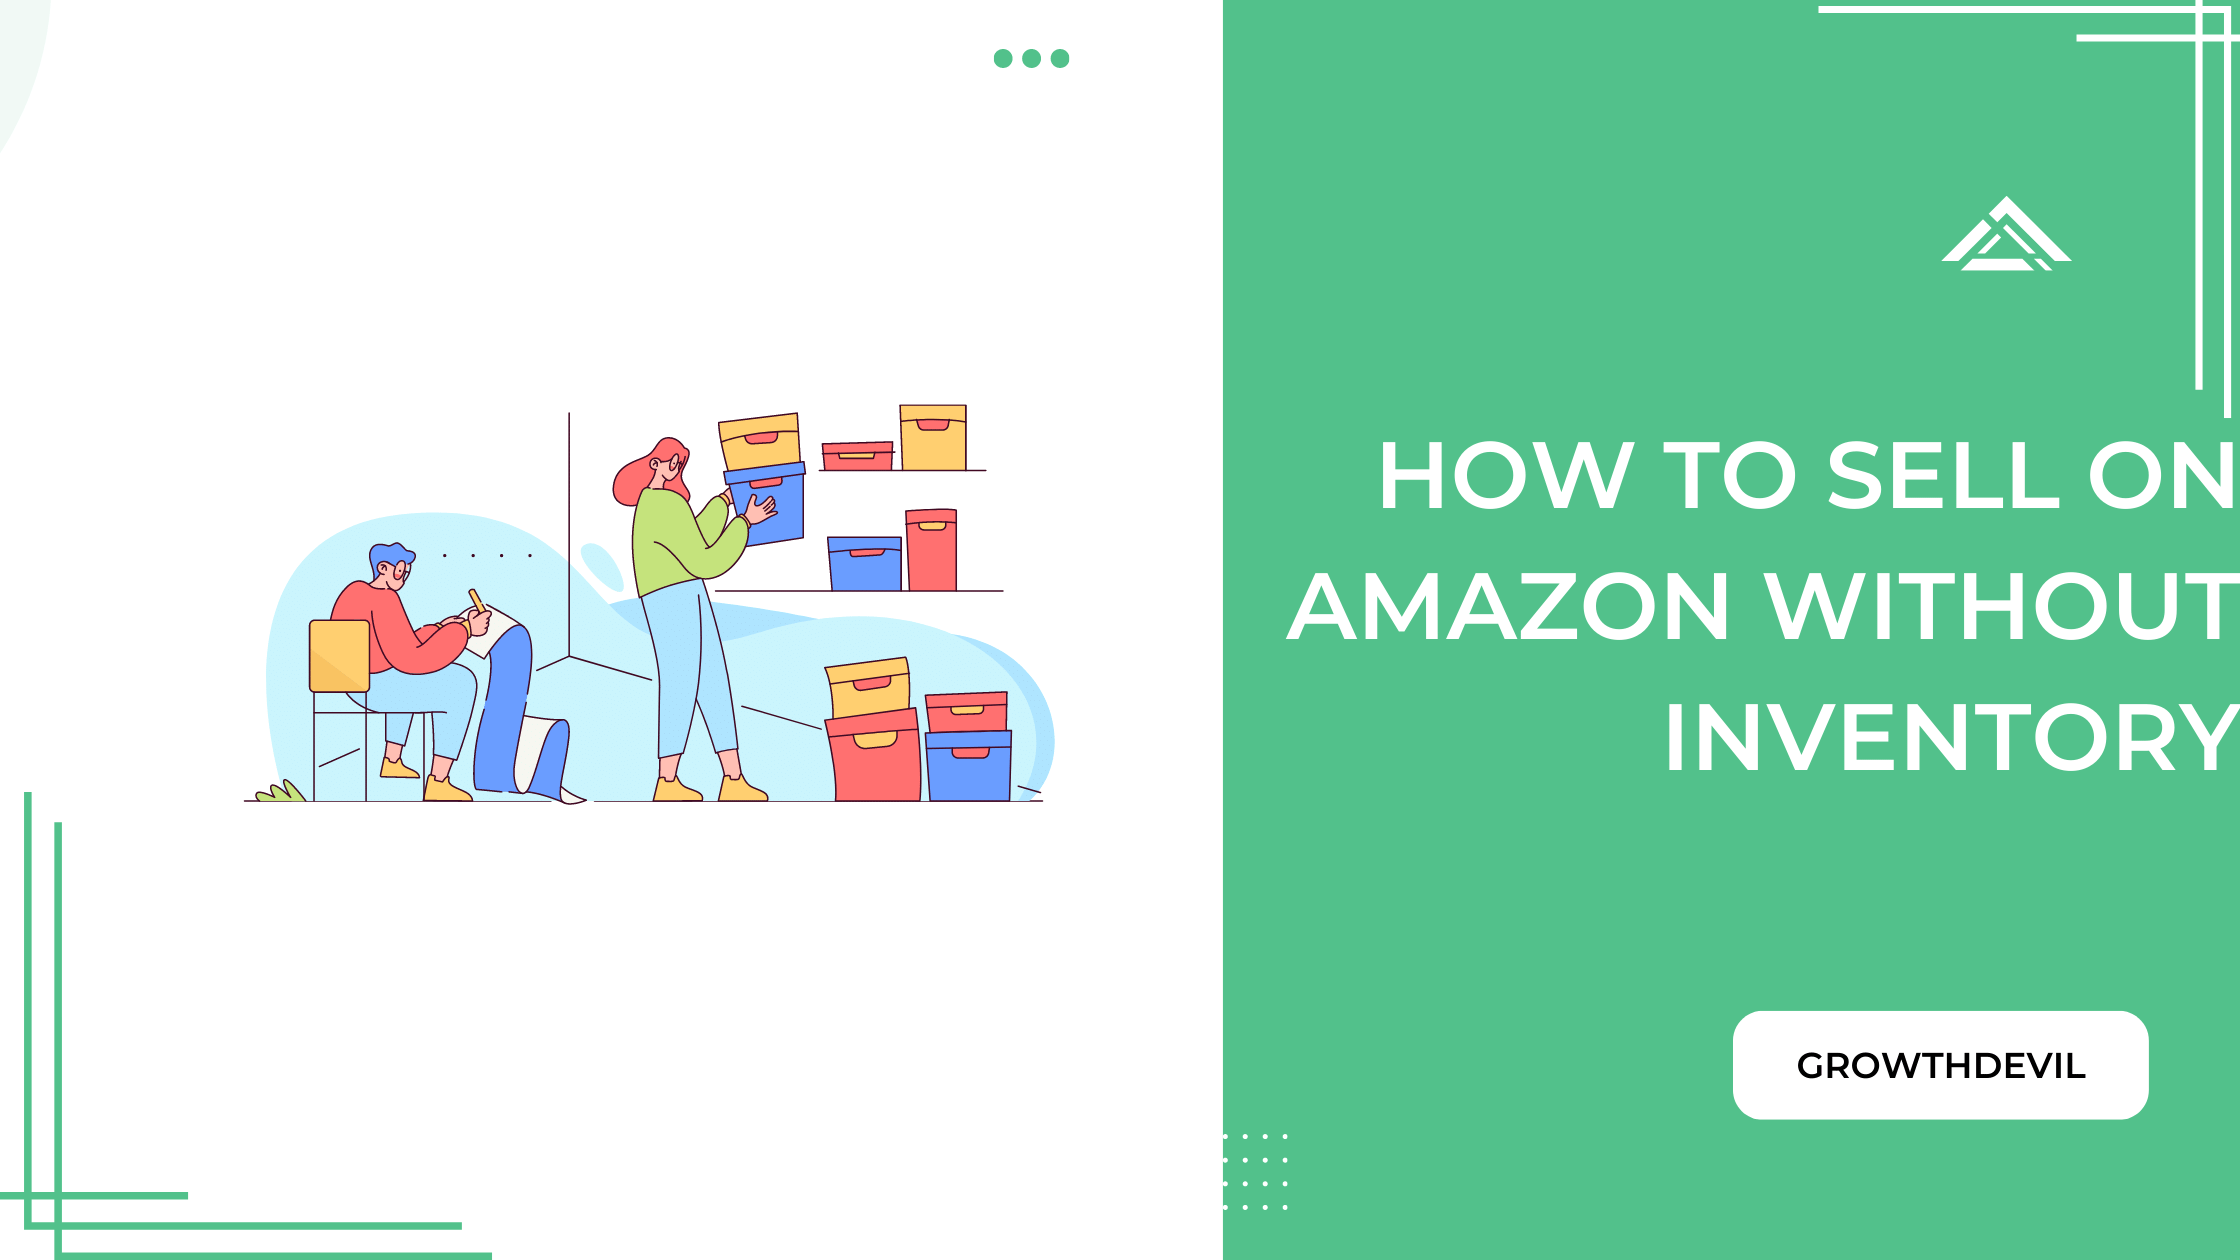 How To Sell On Amazon Without Inventory - GrowthDevil